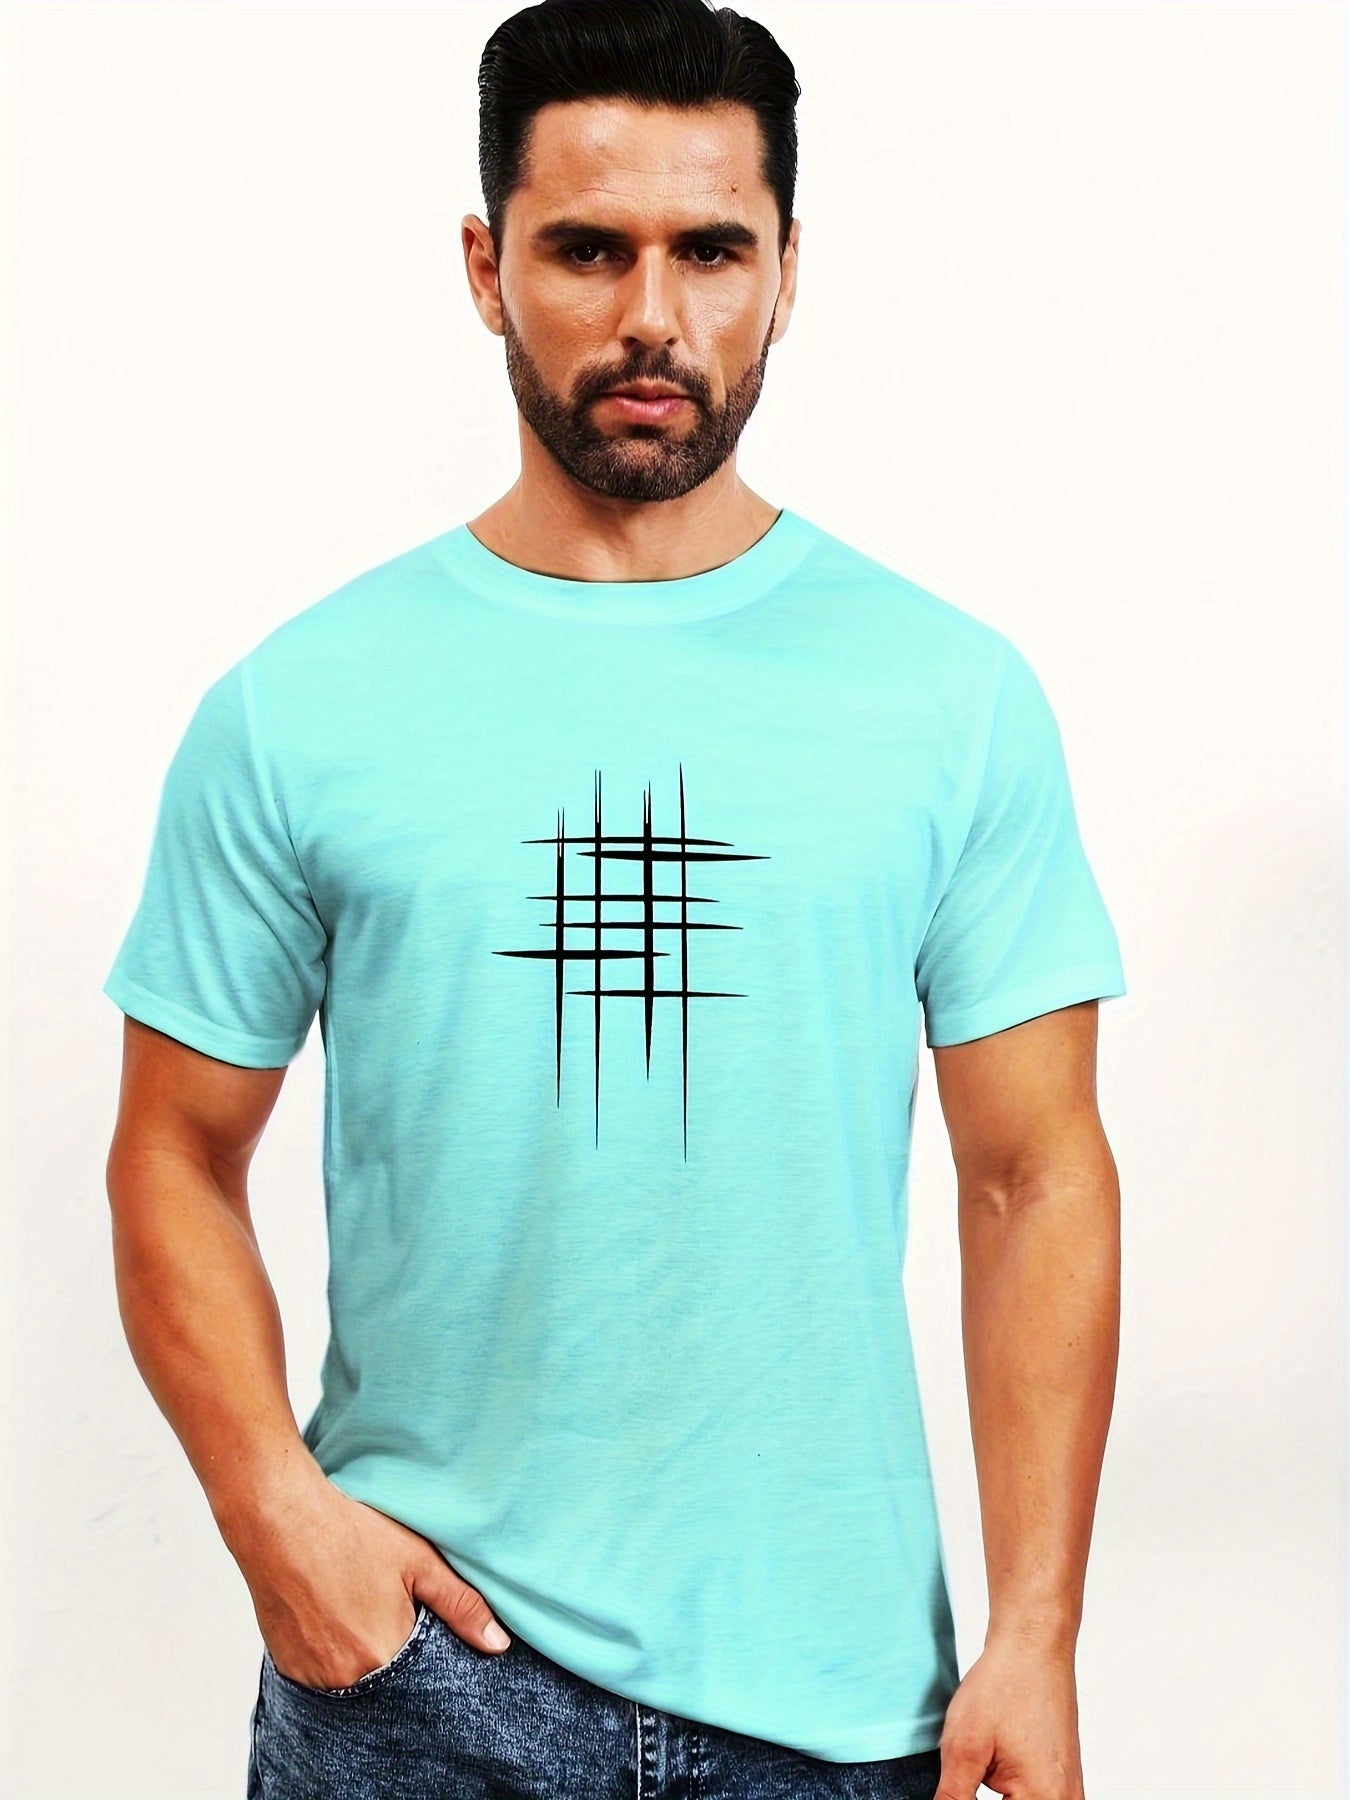 Line Cross Men's T-shirt For Summer Outdoor, Casual Slightly Stretch Crew Neck Tee Short Sleeve Graphic Stylish Clothing